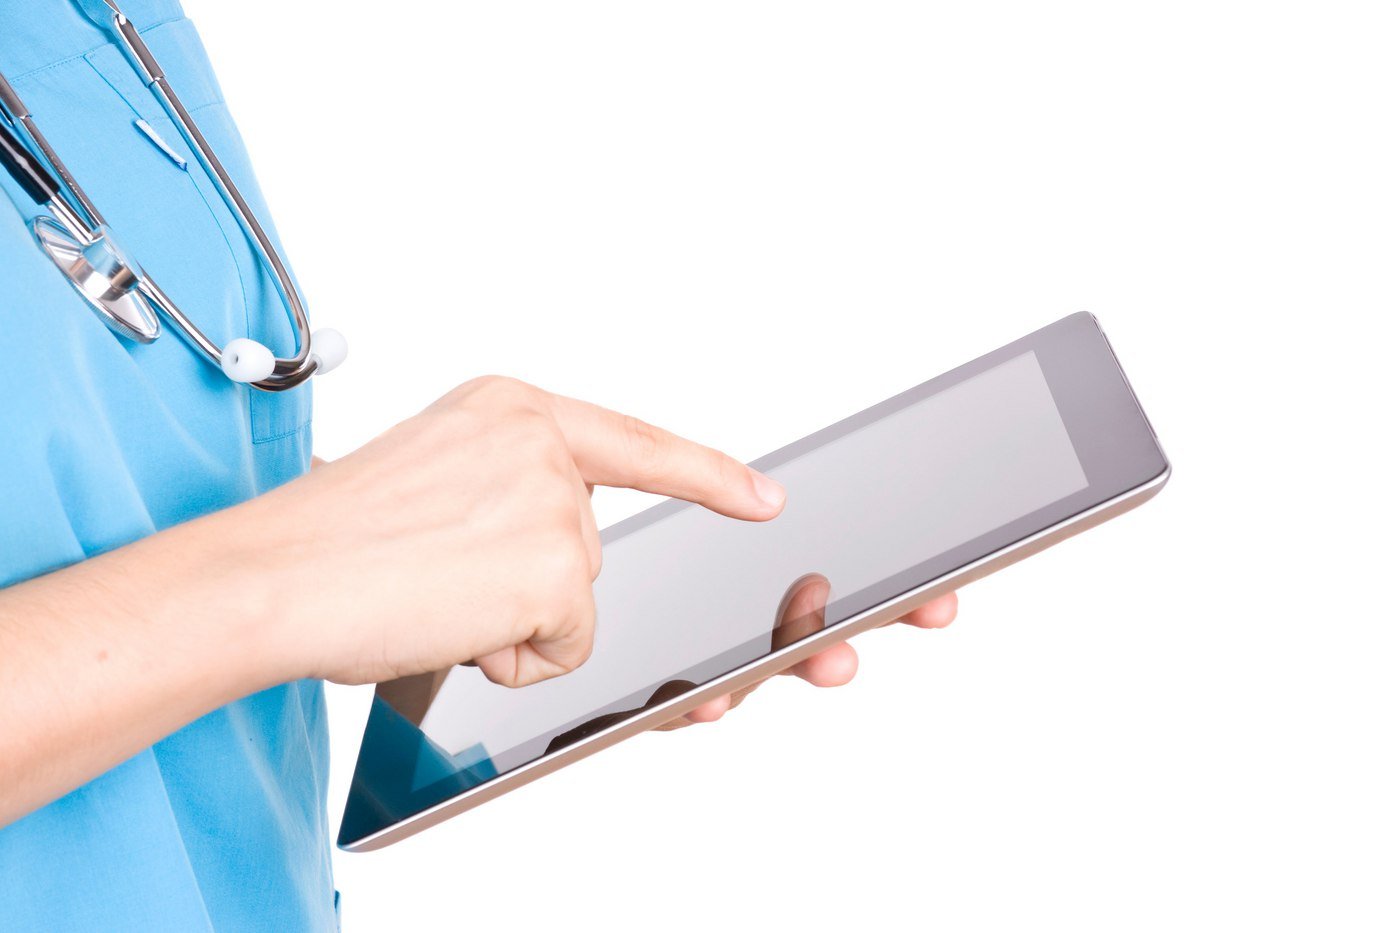 Physician adoption rate for mobile devices